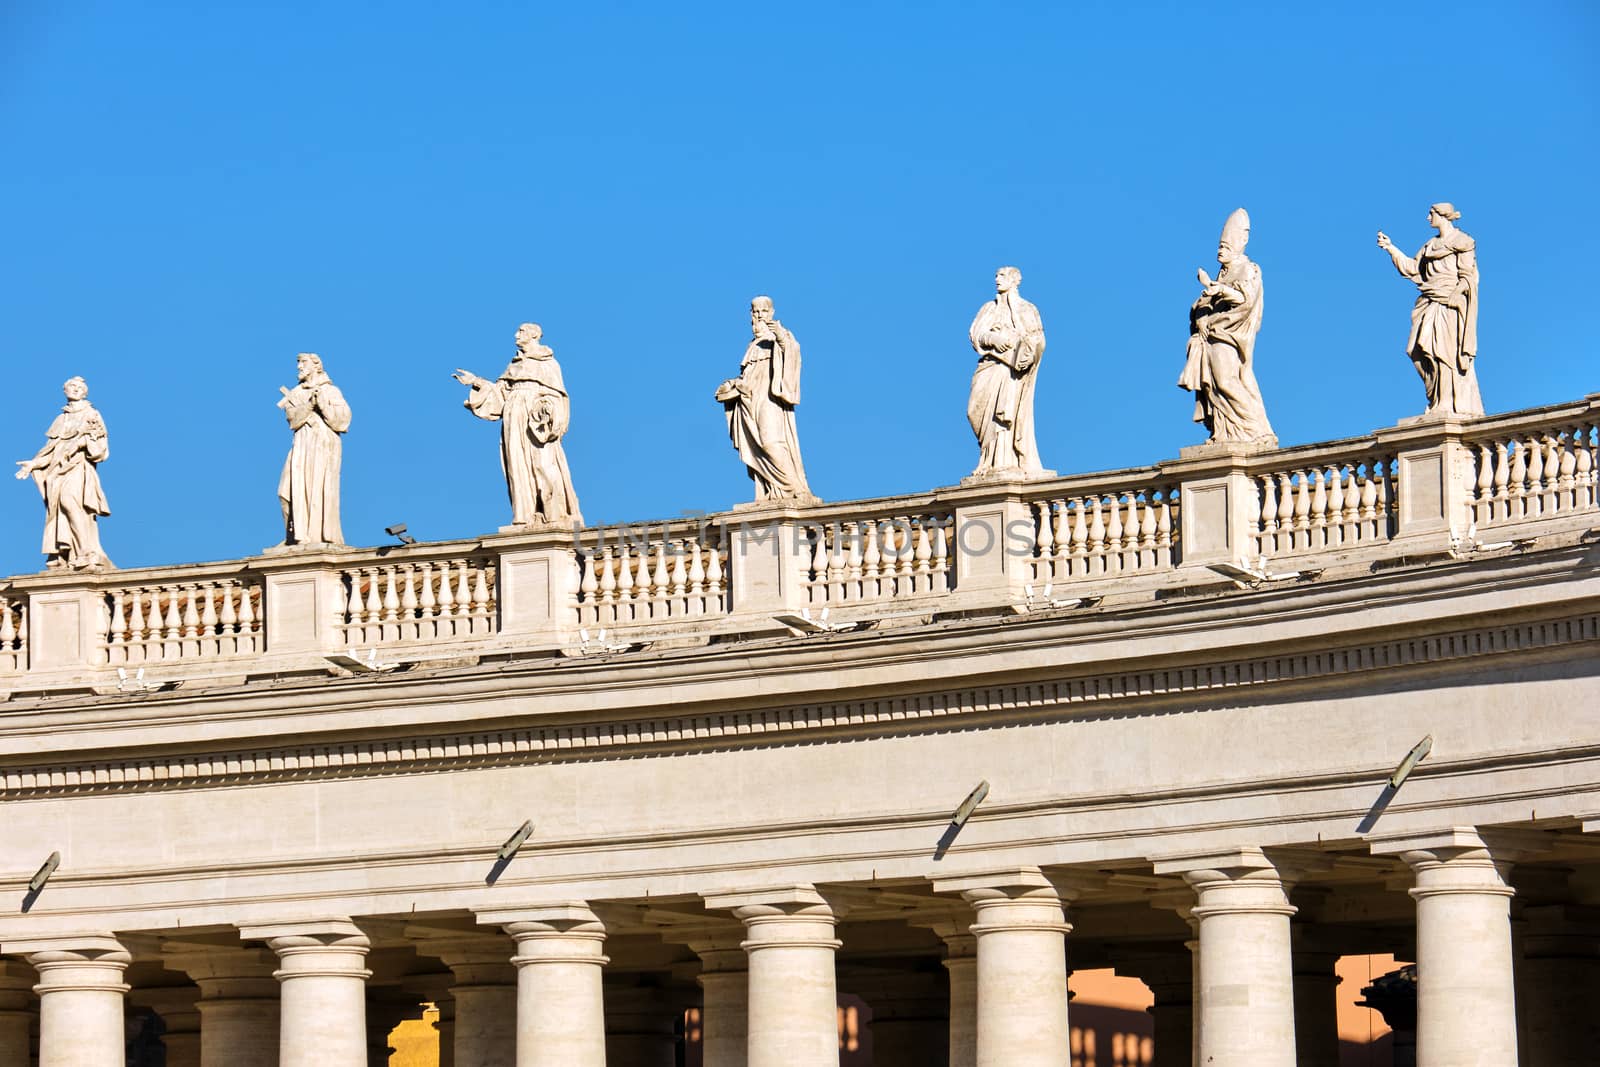 Detail of the statues and columns around St. Peters Square in Rome